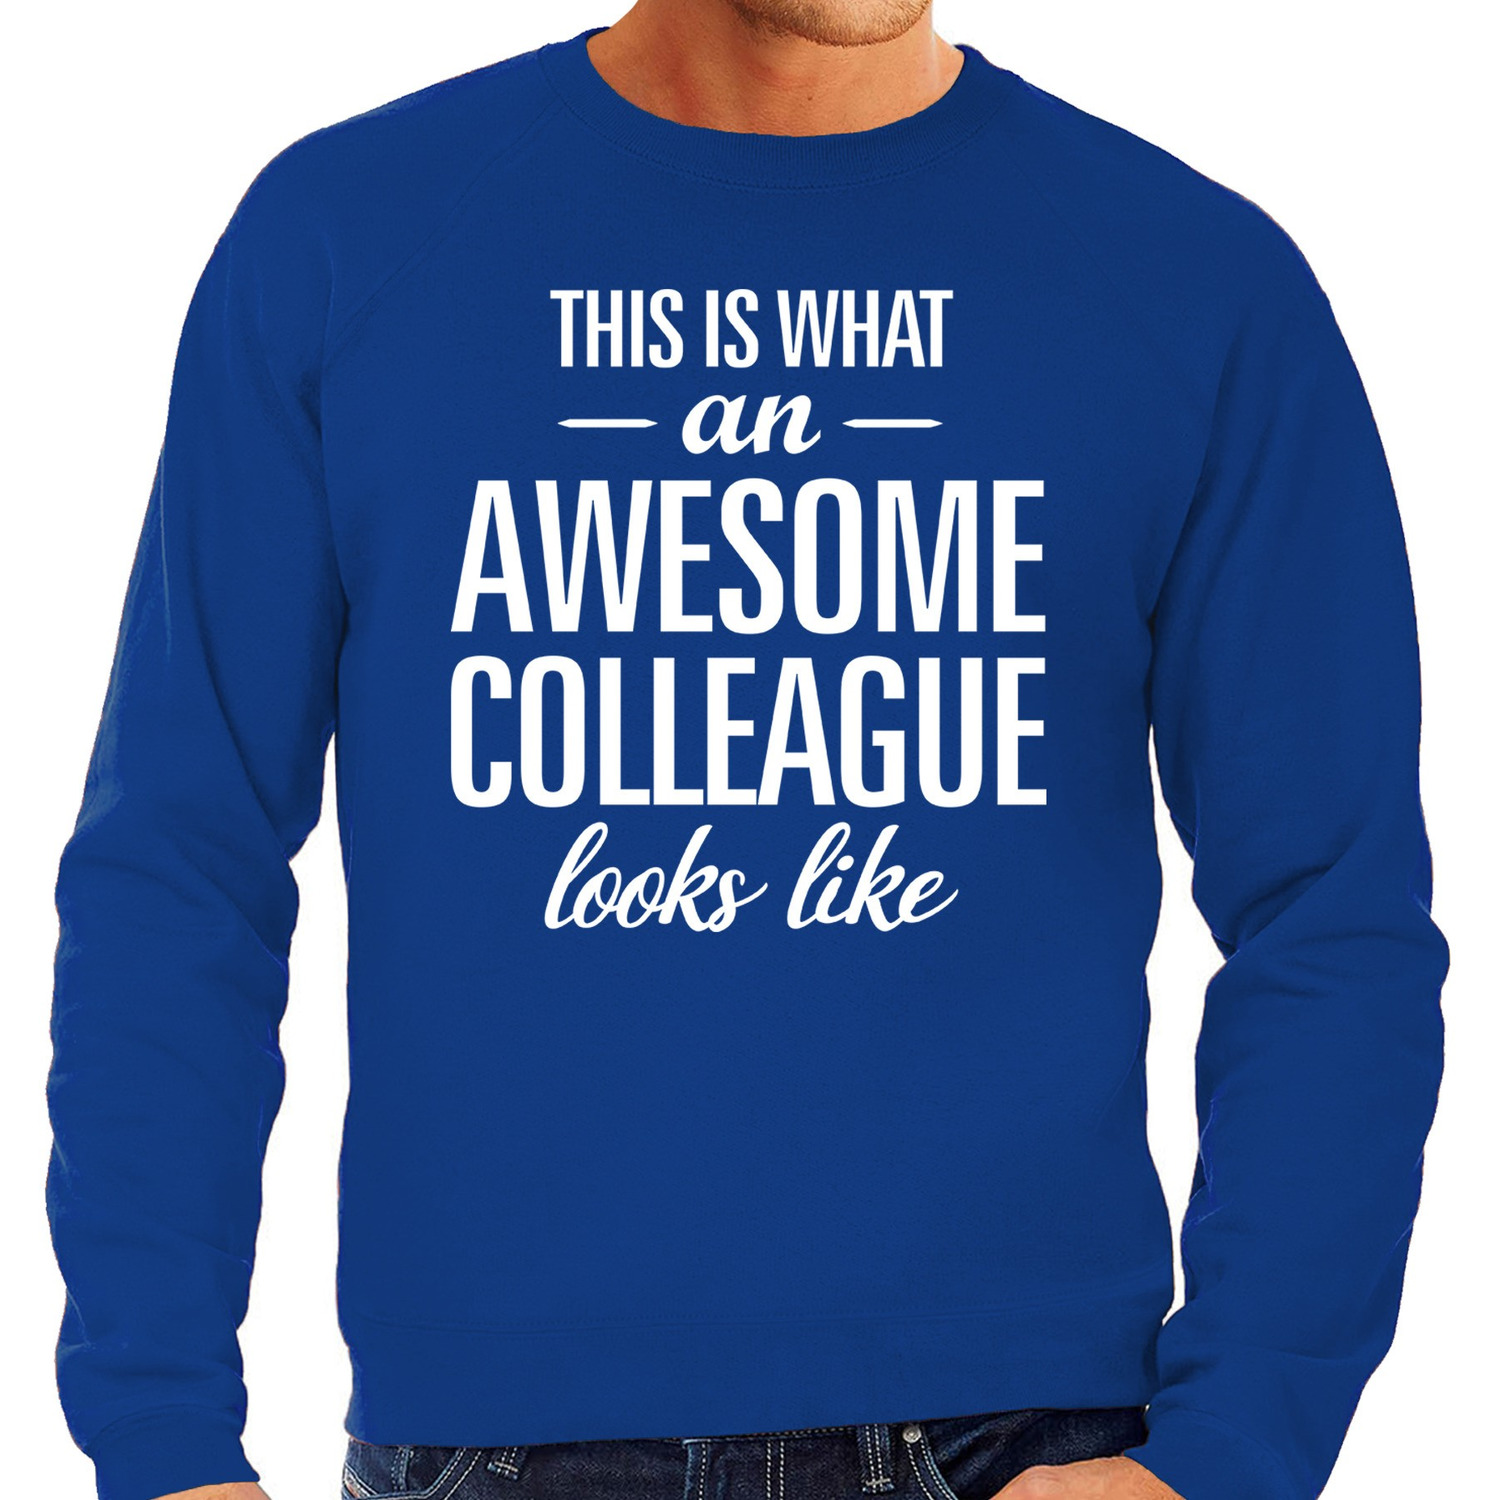 Awesome colleague / collega cadeau sweater blauw heren